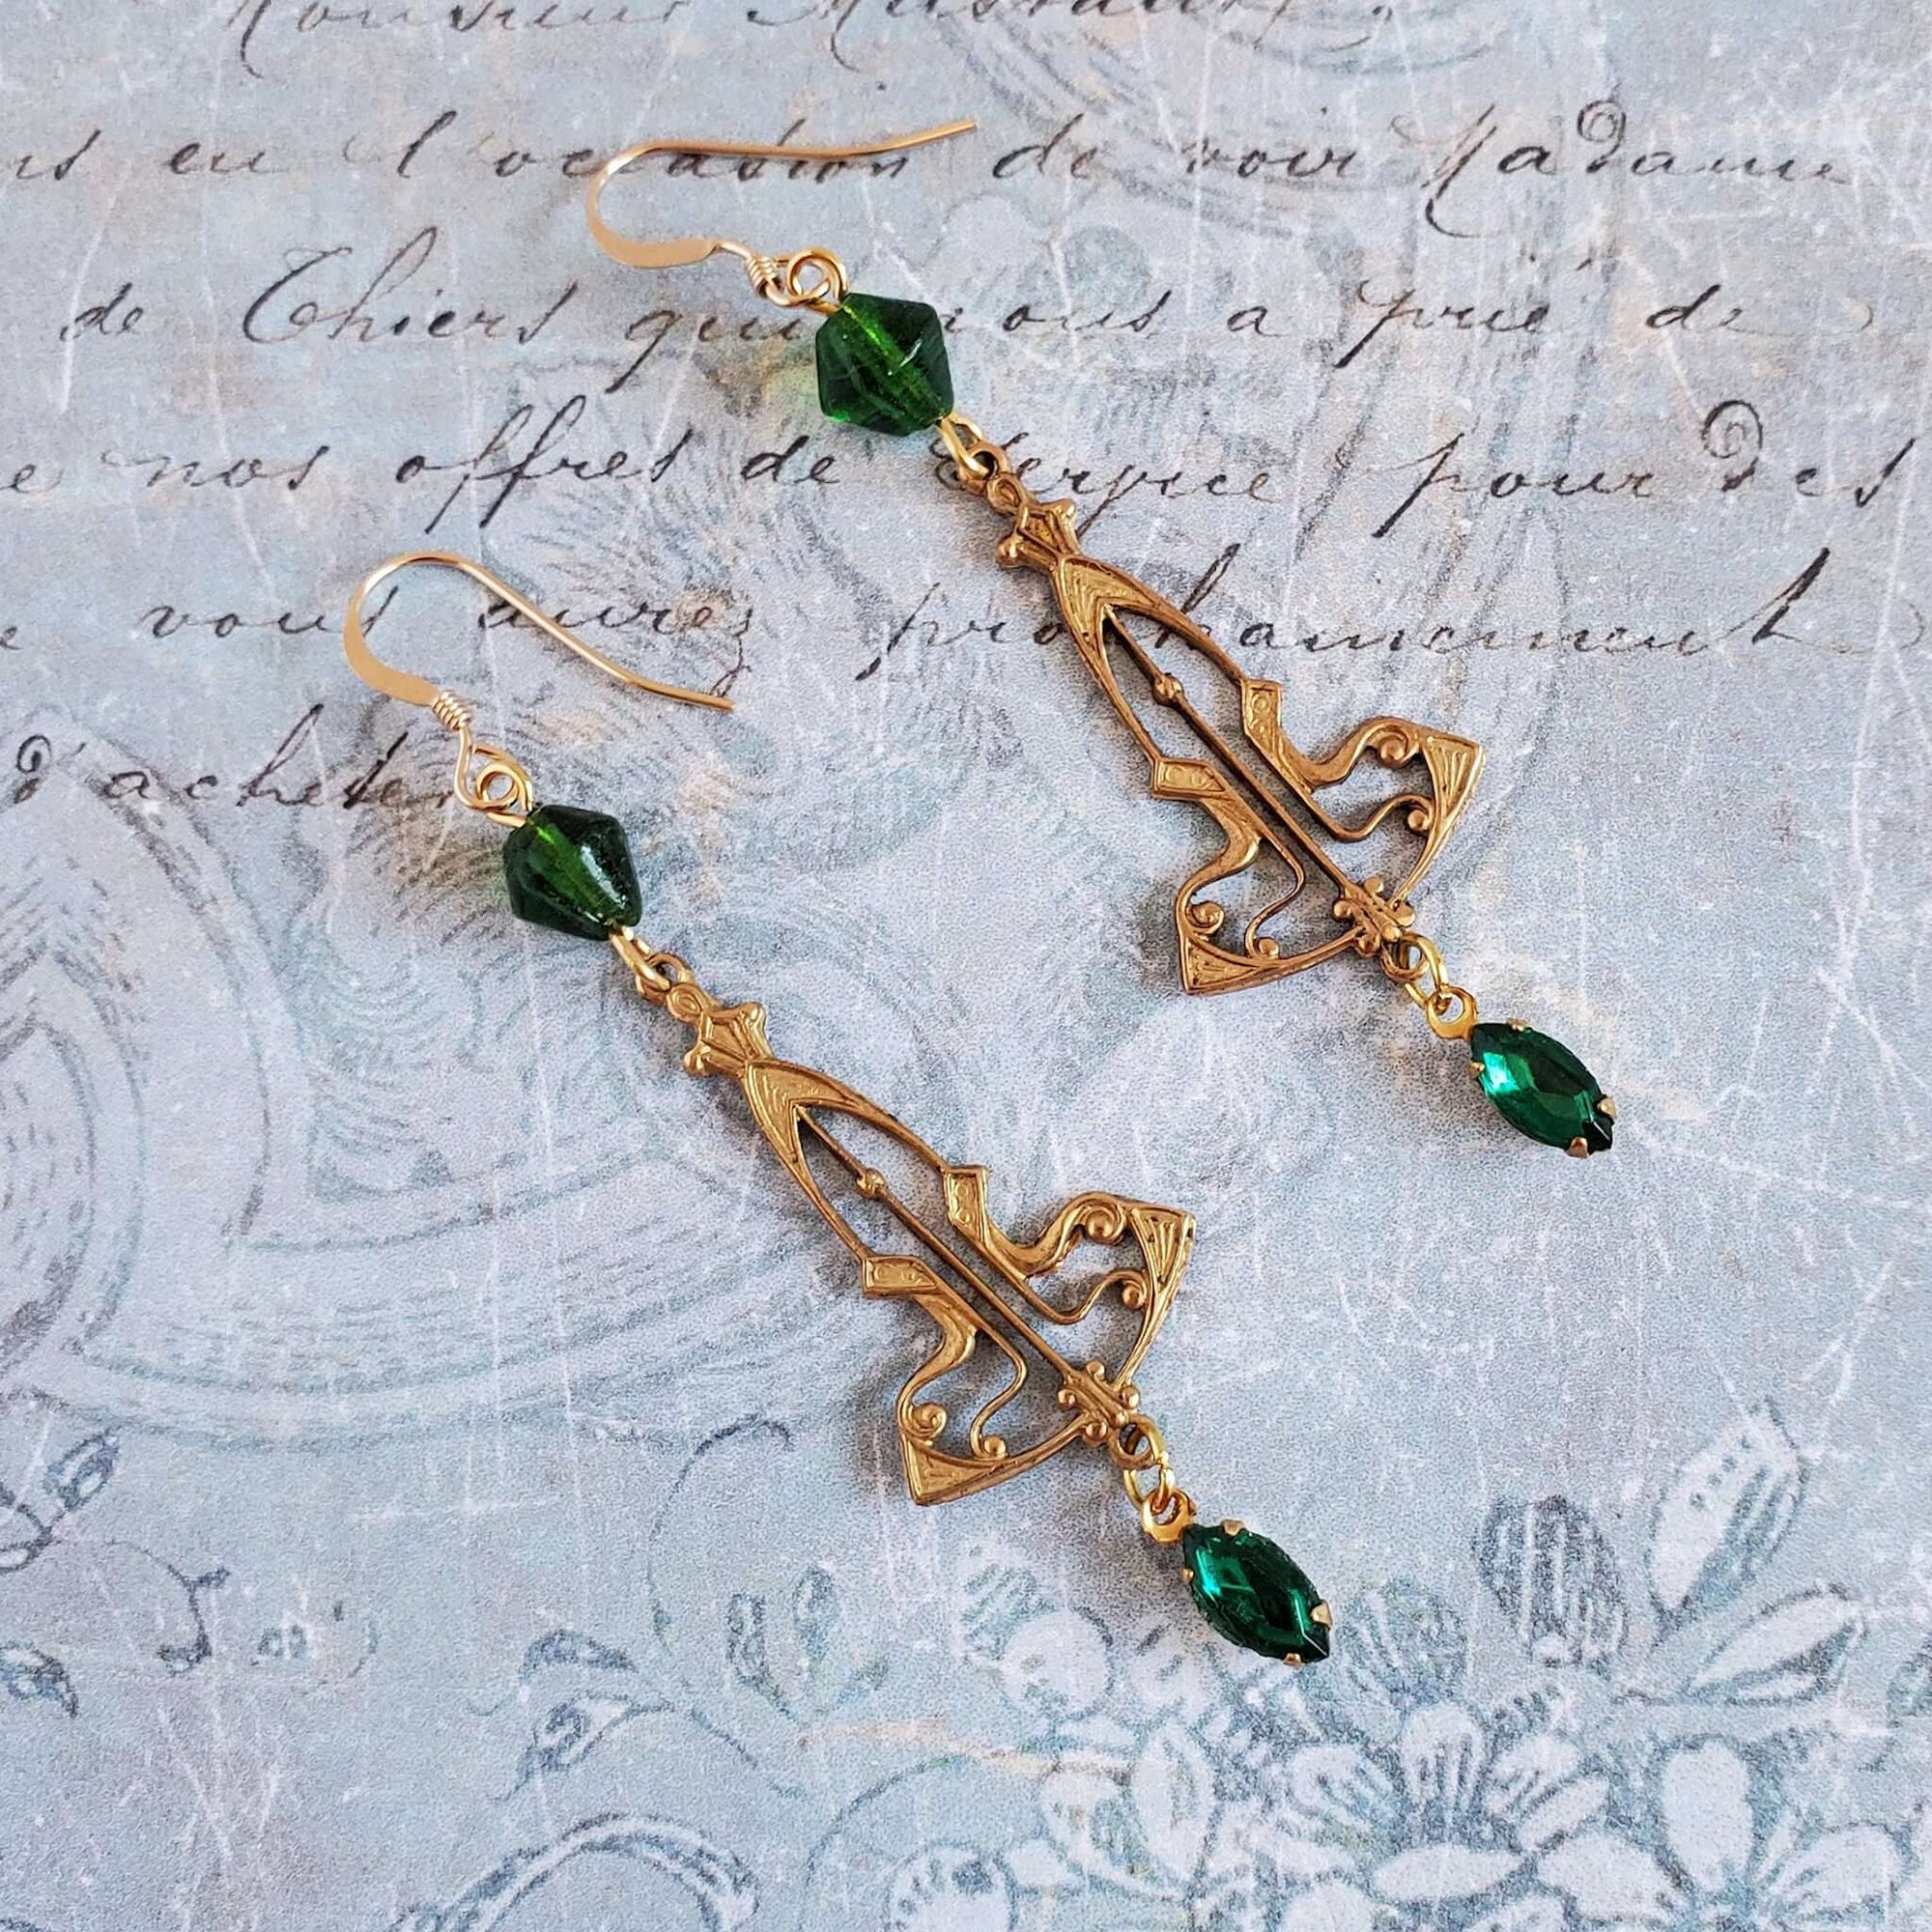 Art Nouveau Style Earrings with Green Accents